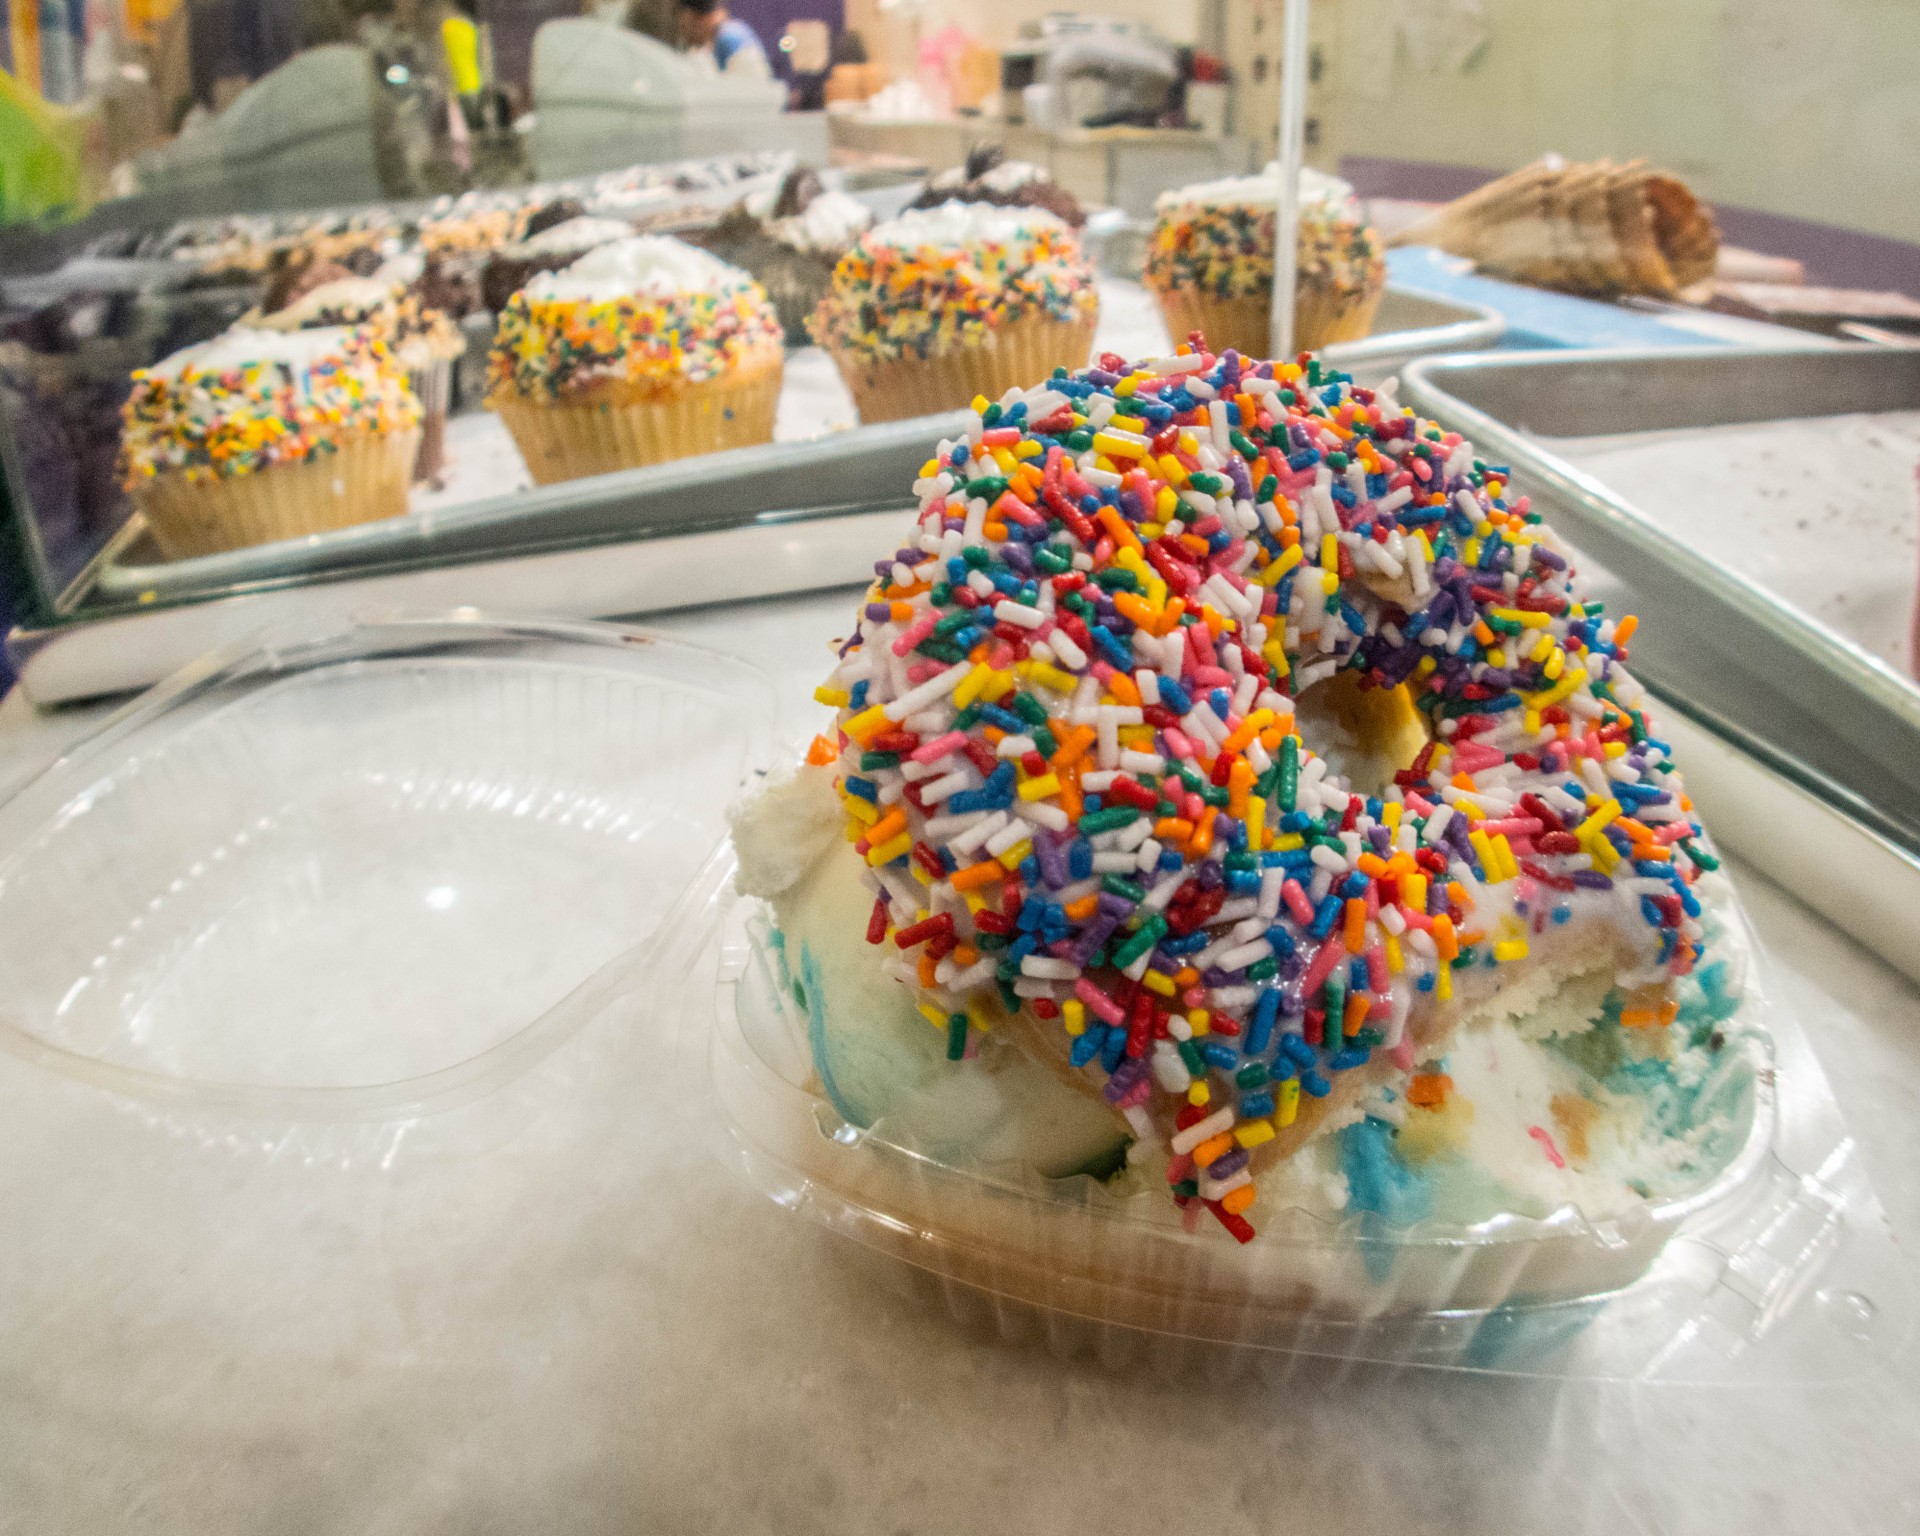 An Ice cream sandwich made out of a sprinkled donut